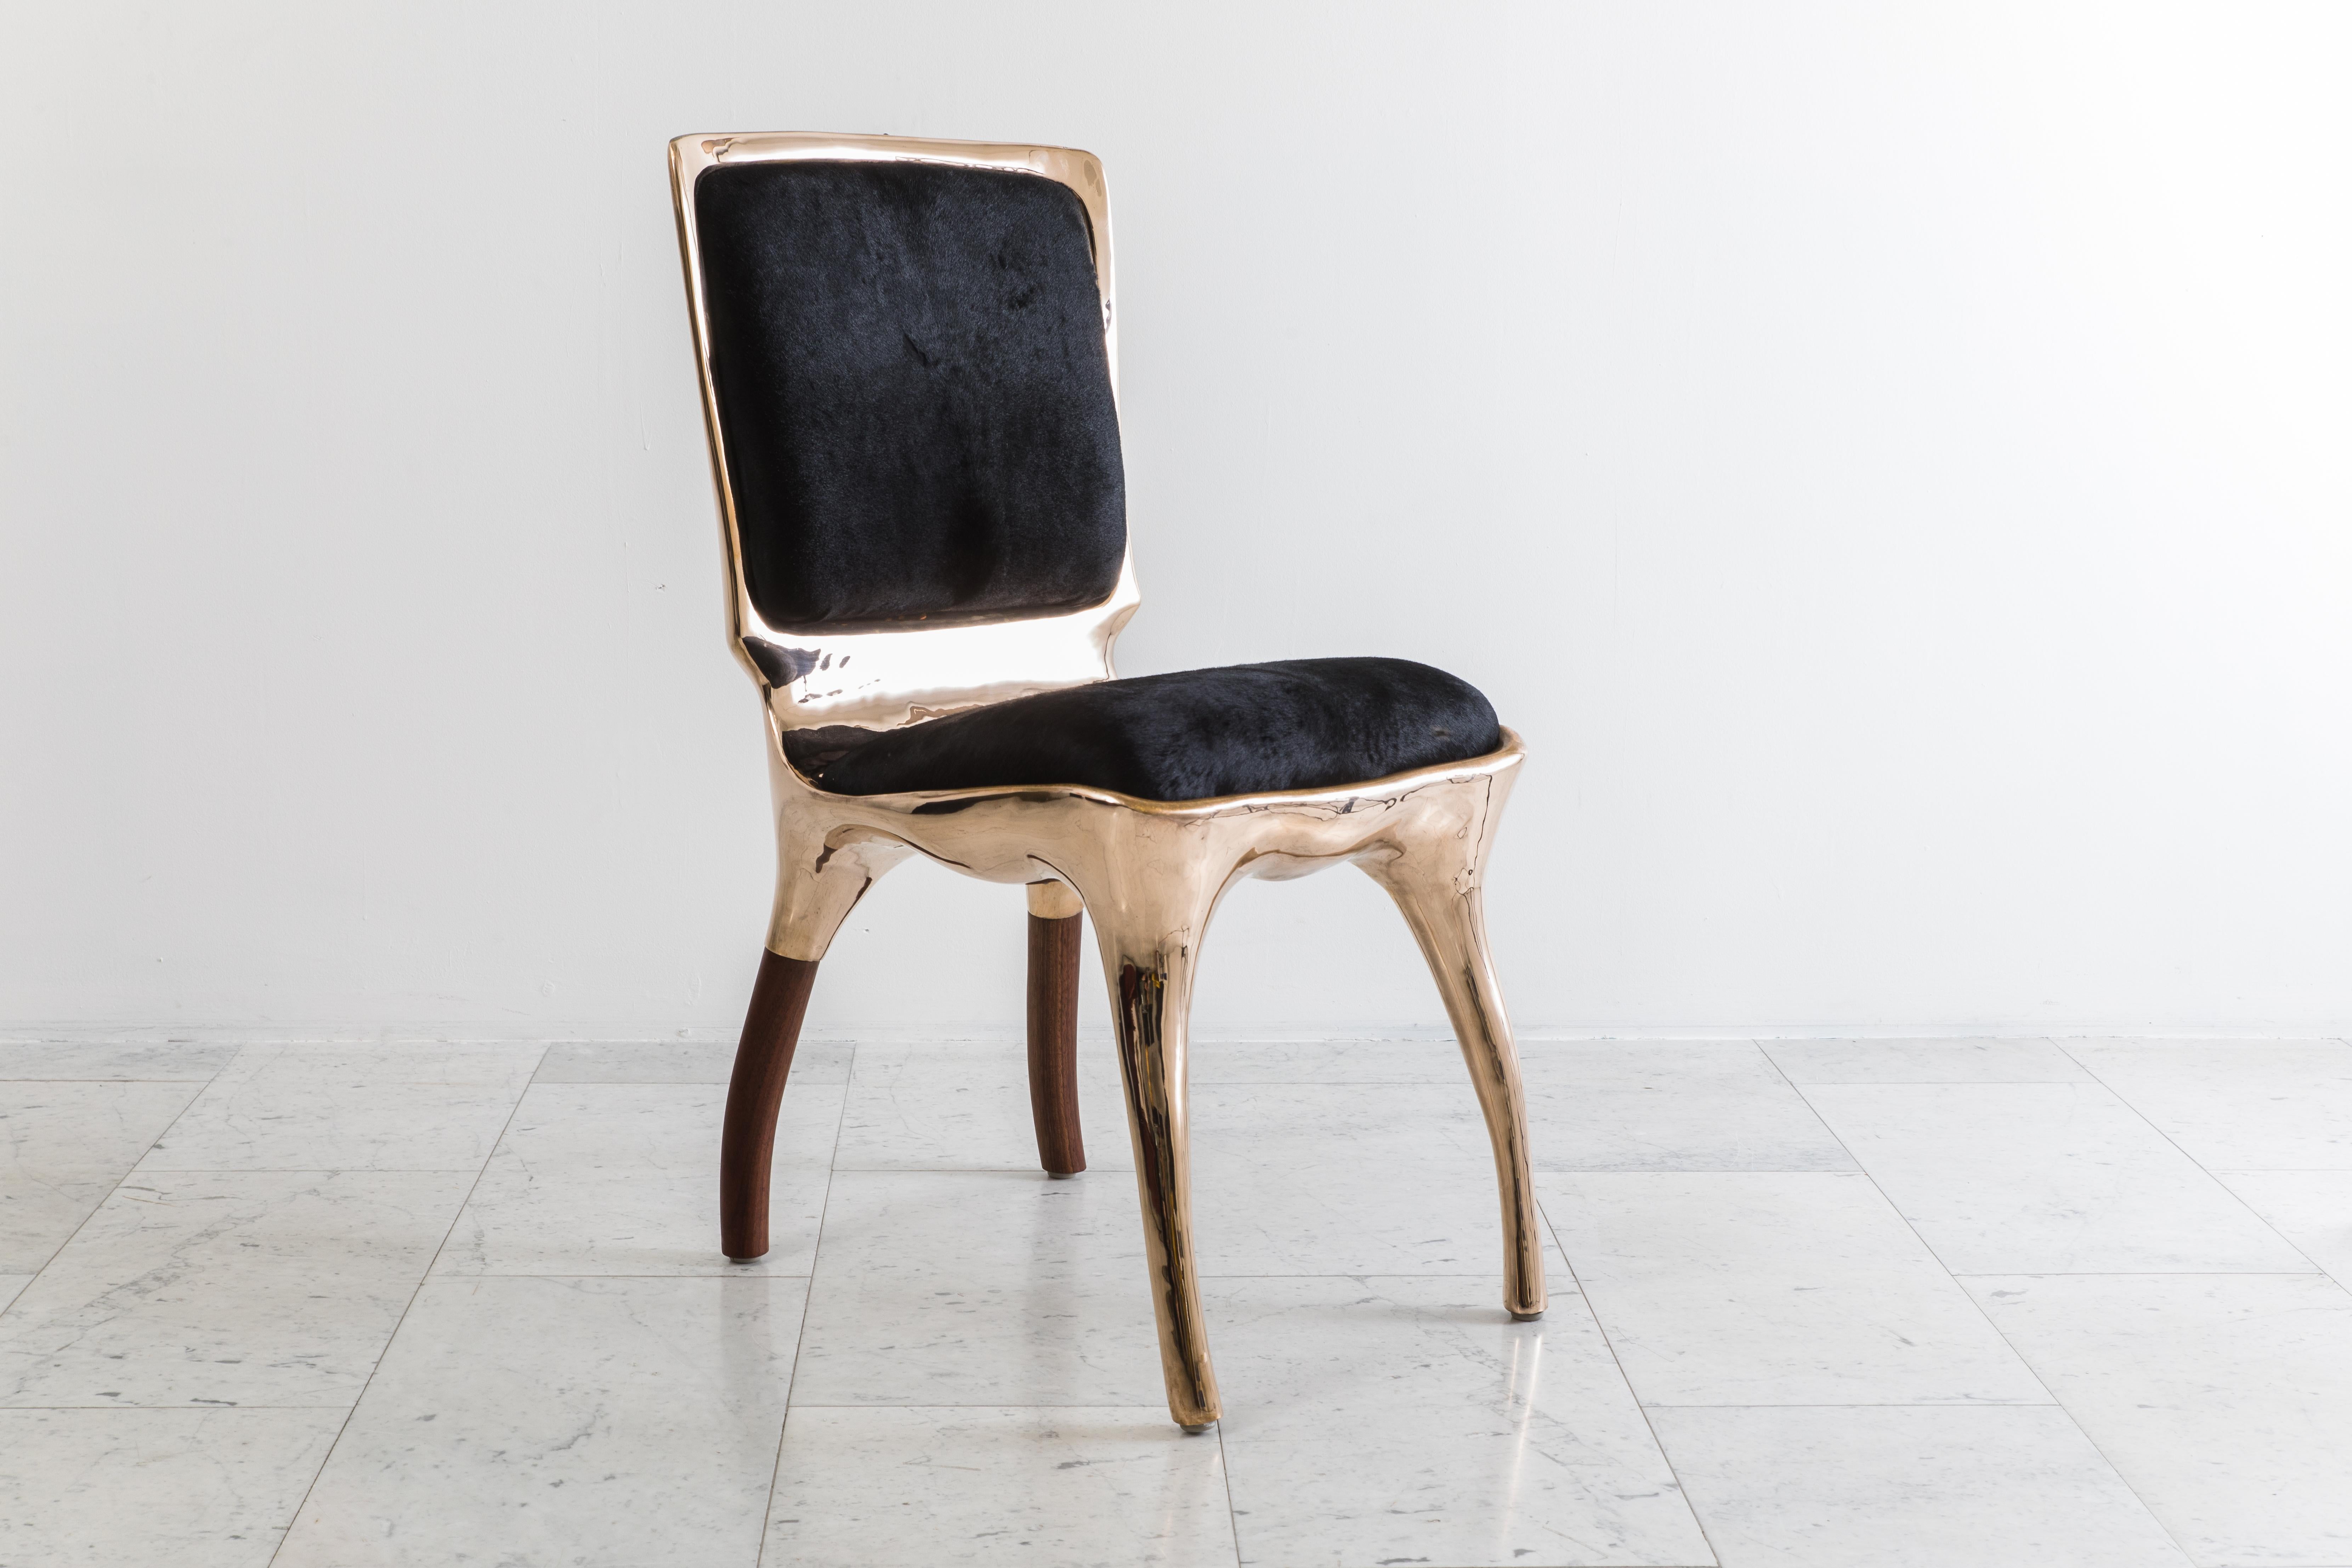 
Inspired by his Biche Desk, the Tusk Chair II reflects Alex Roskin penchant for an animality in form. The versatile chair can be used as a salon chair, a desk chair, or grouped for a dining set.

The chair features an mammalian physicality,